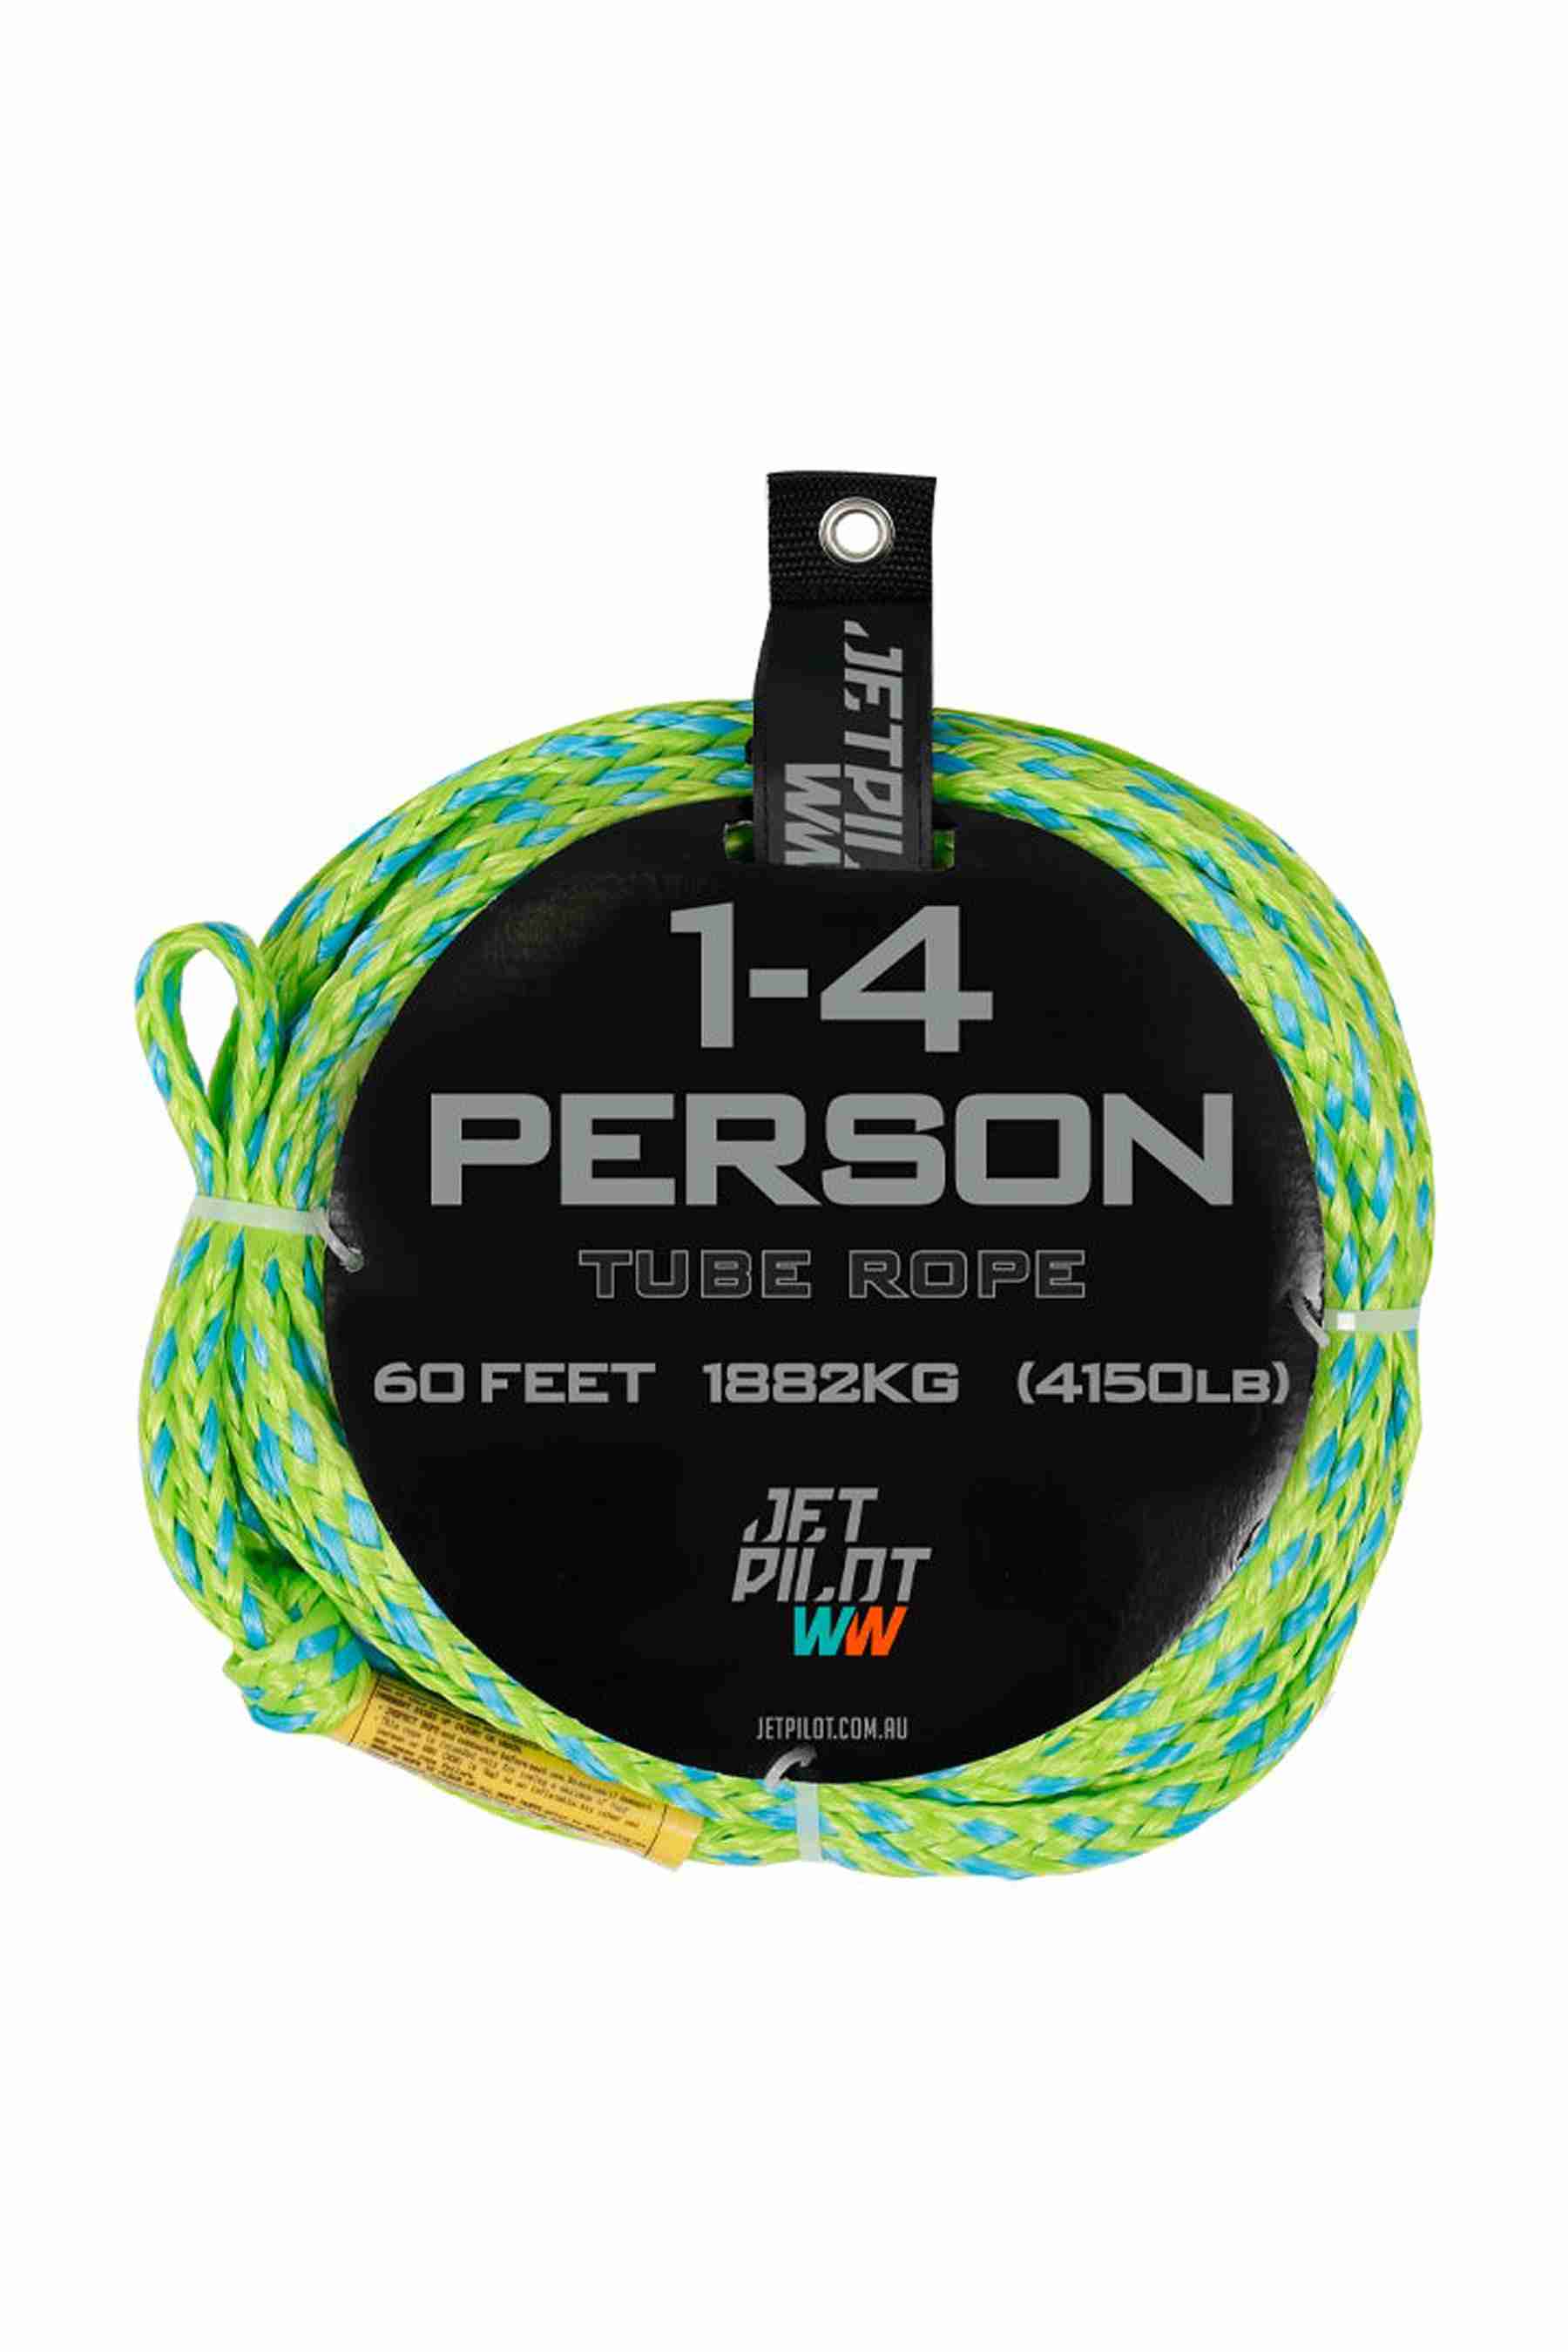 1-4 PERSON TUBE ROPE Green